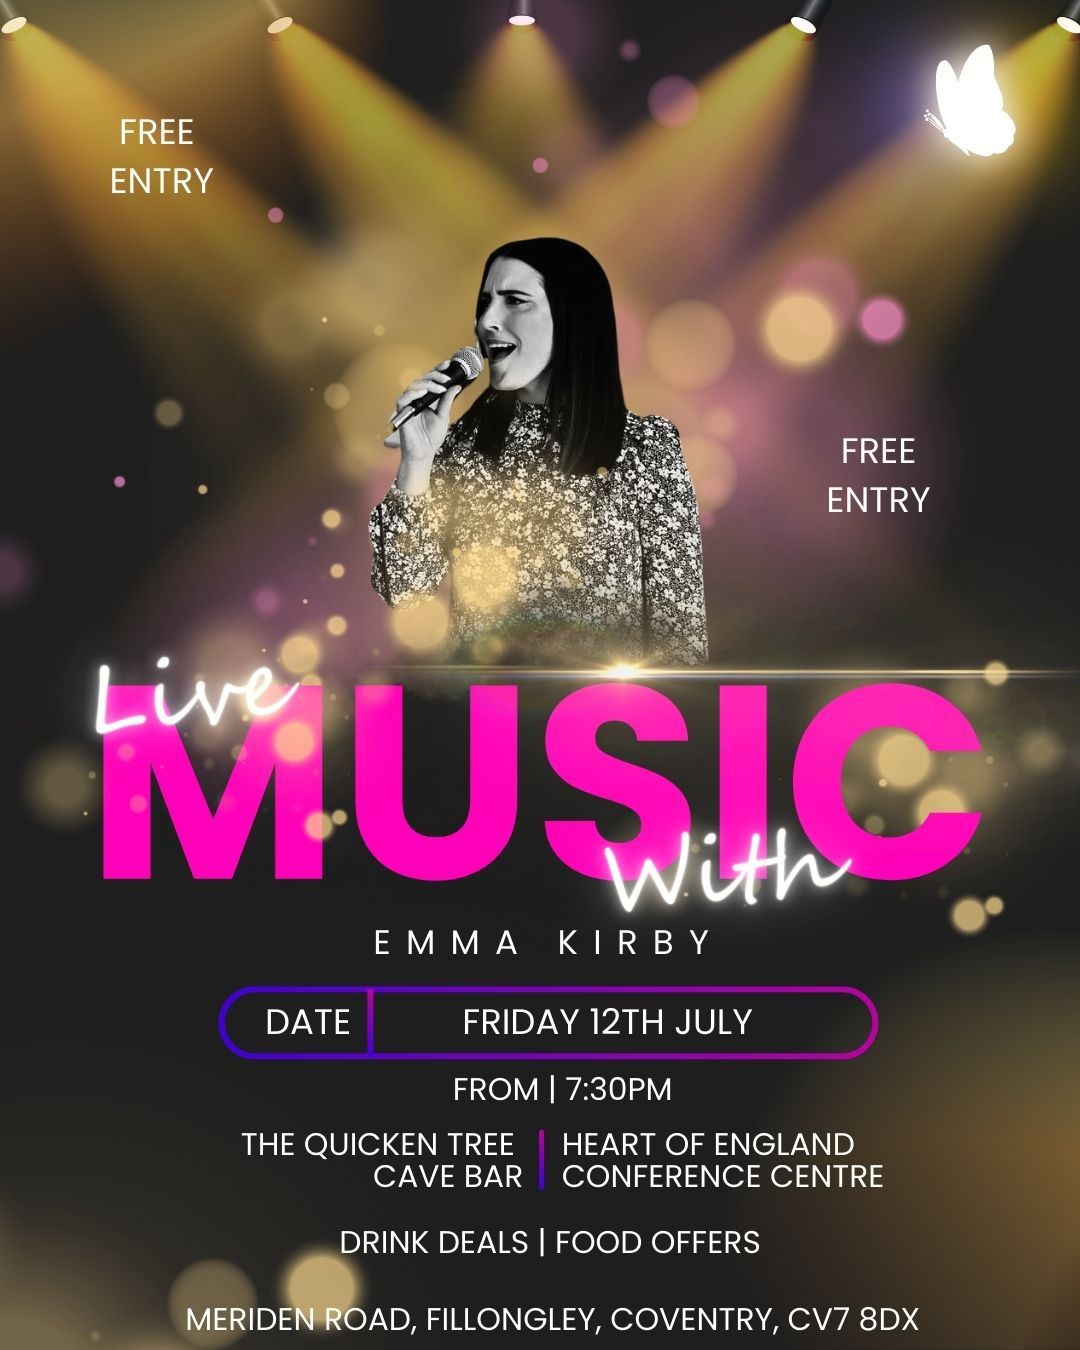 Live Music from Emma Kirby